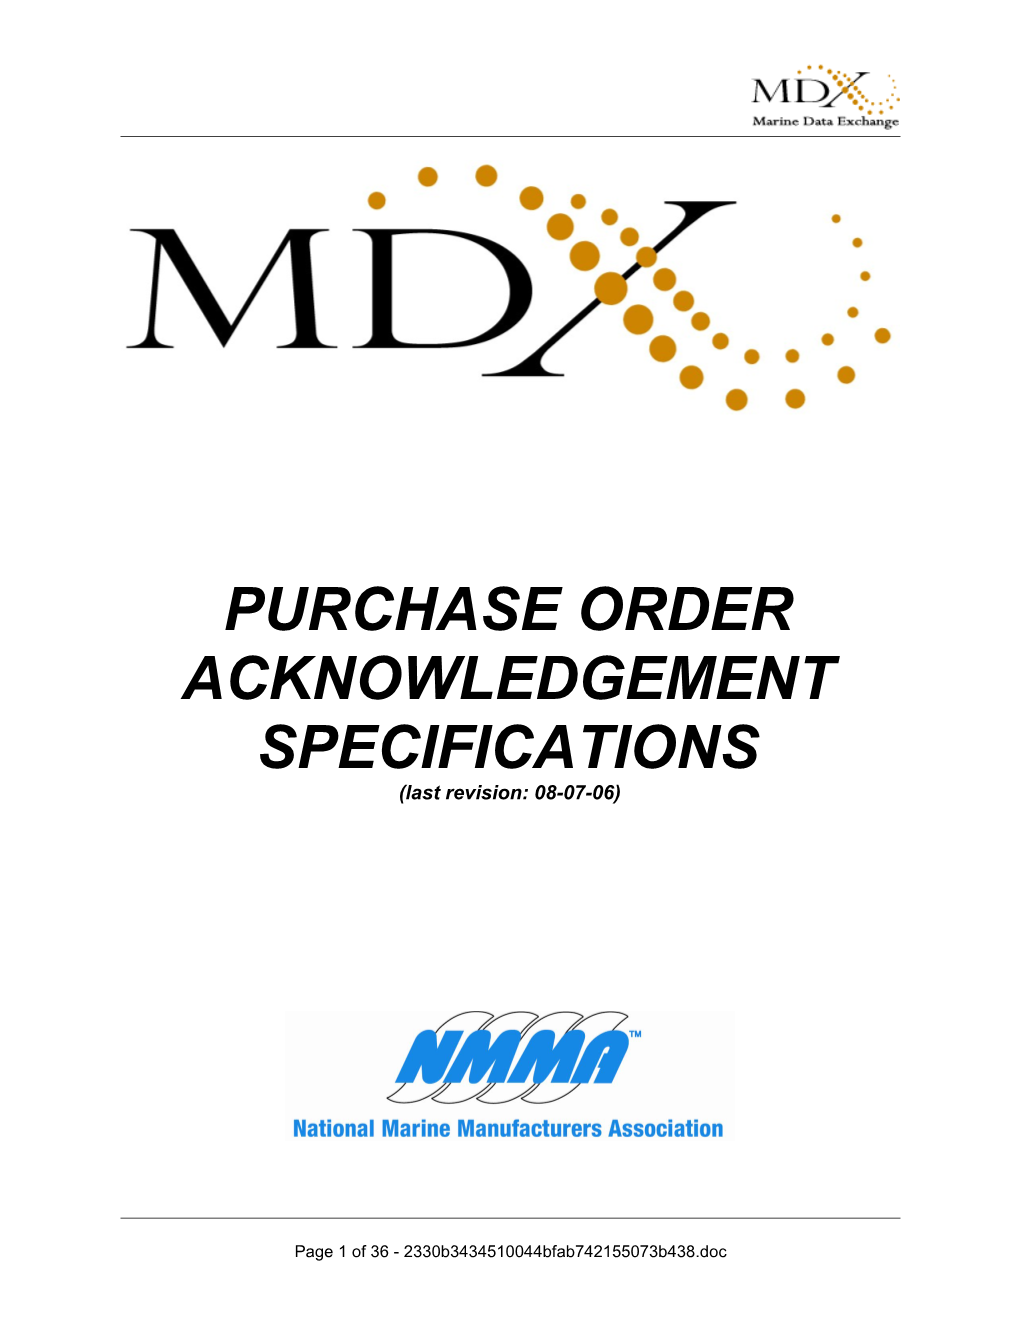 MDX Purchase Order Acknowledgement File Specification